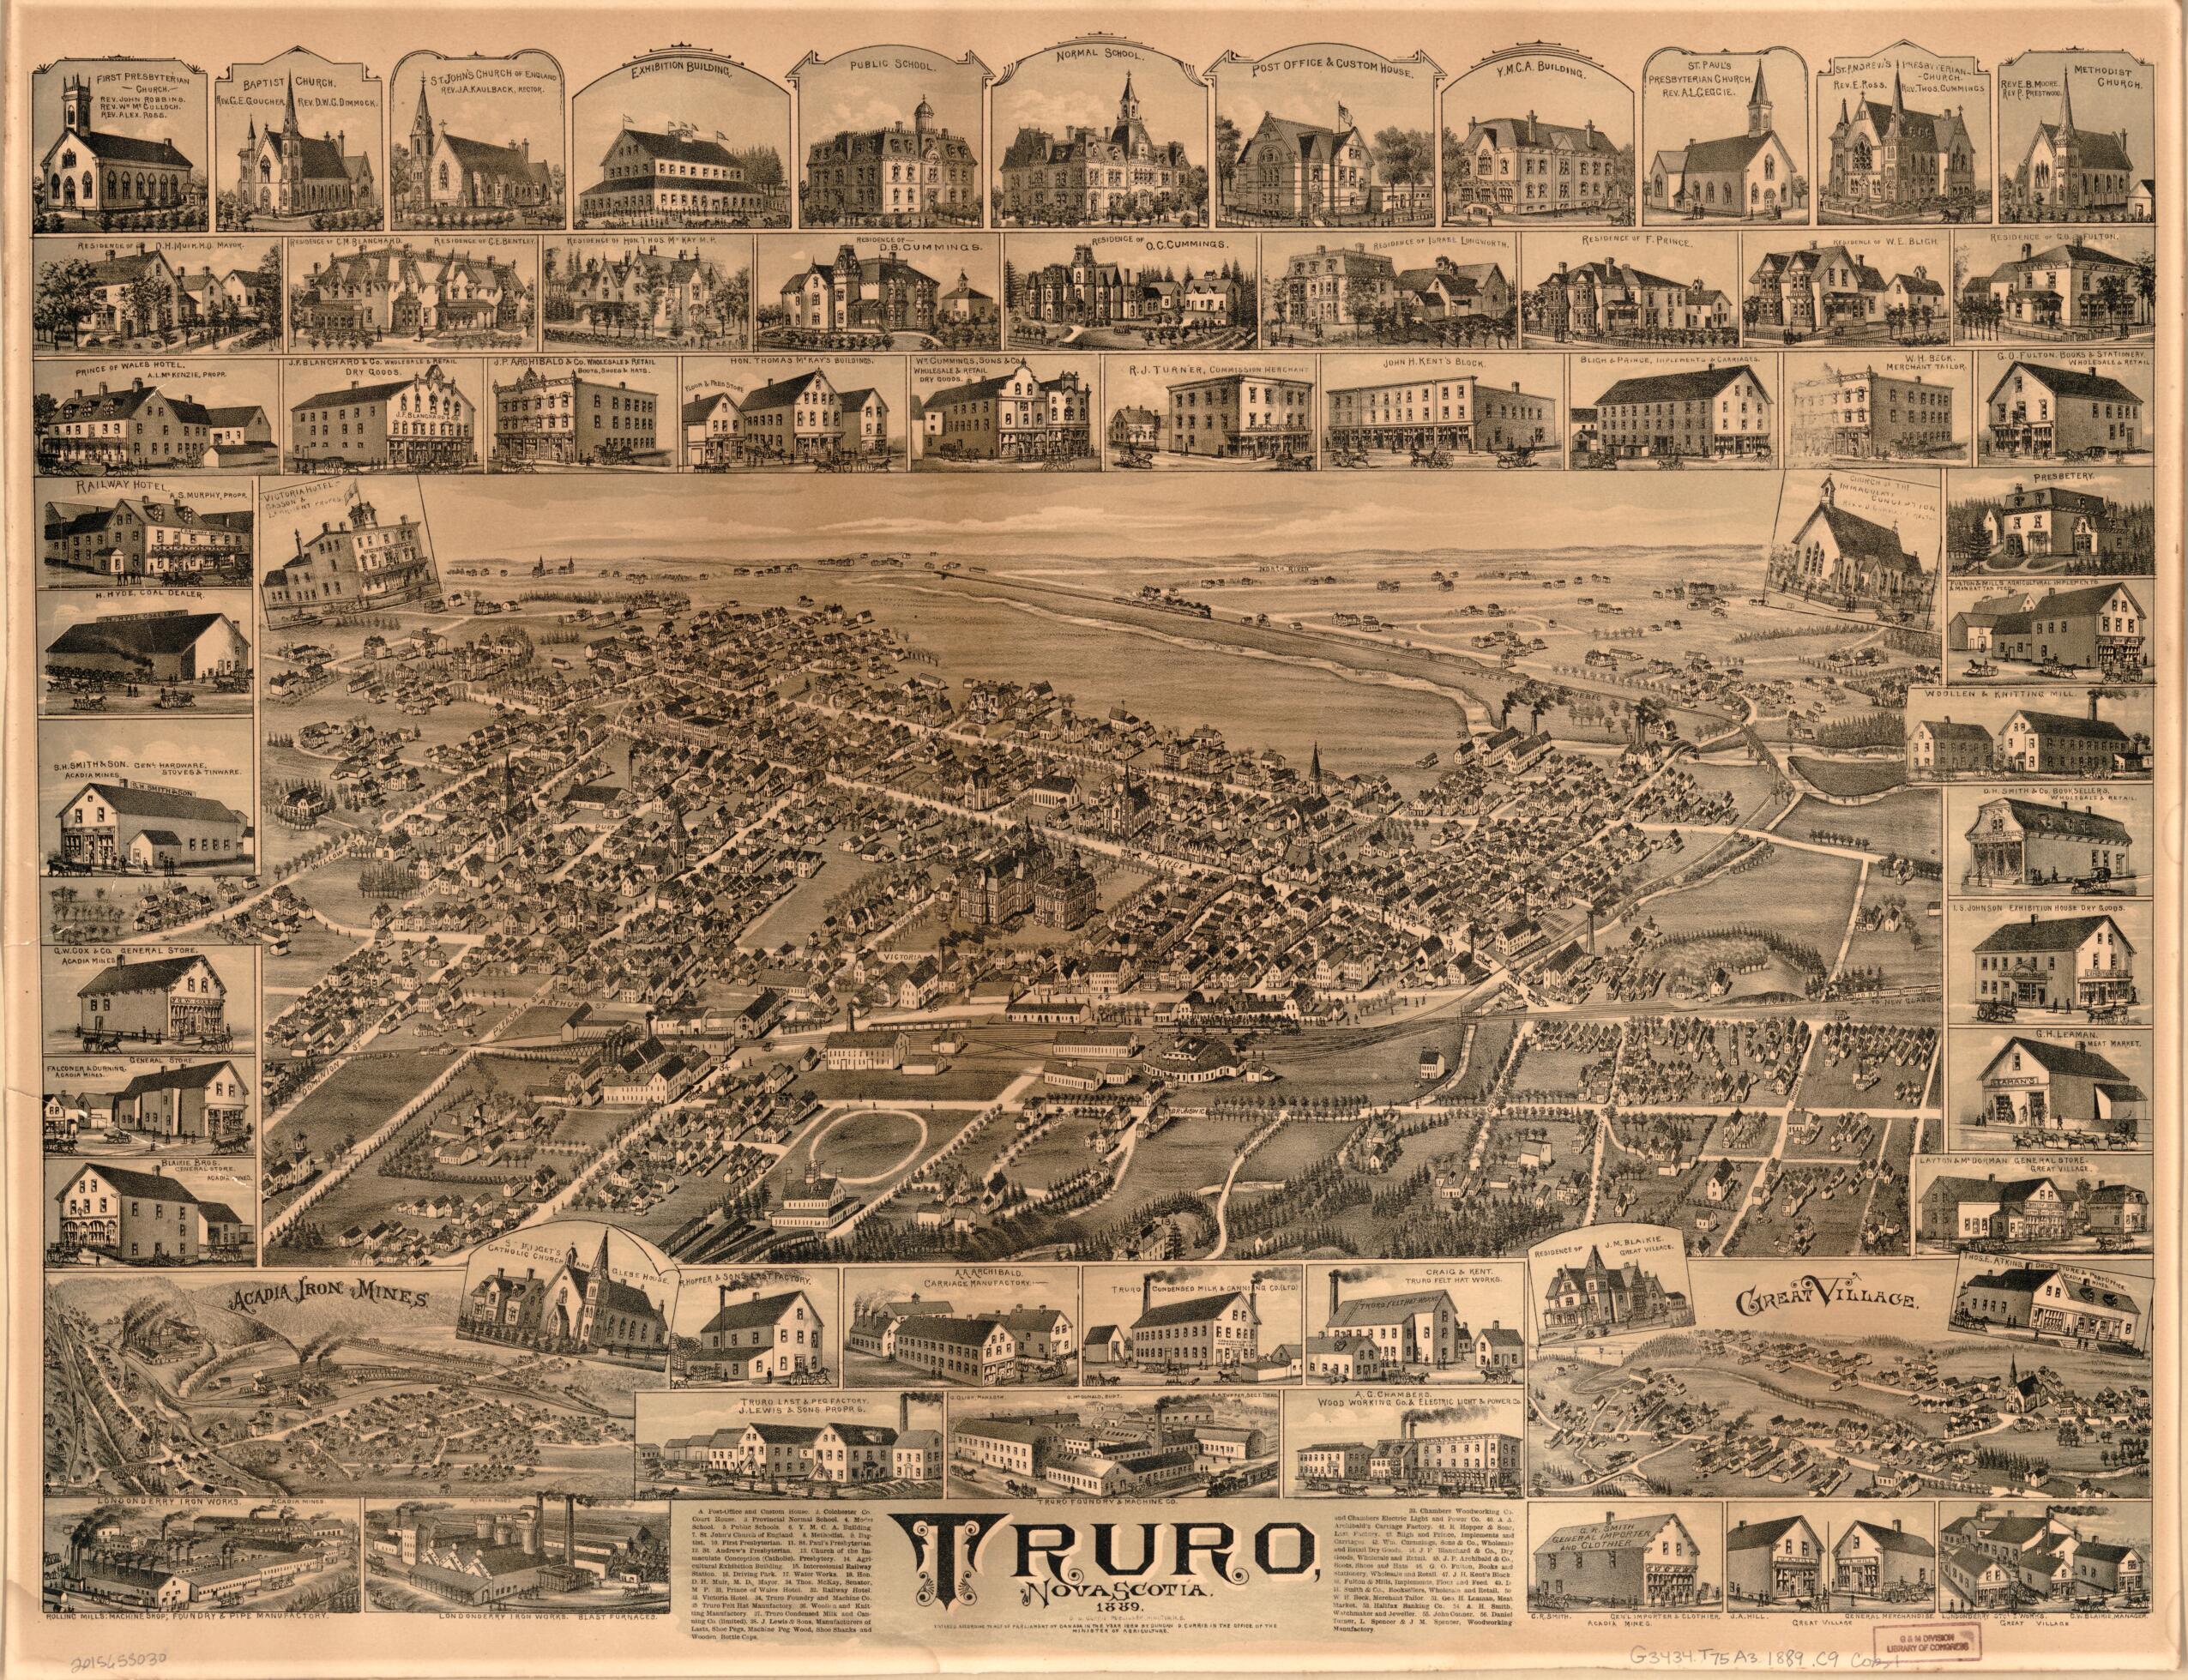 This old map of Truro, Nova Scotia, from 1889 was created by Duncan D. Currie in 1889